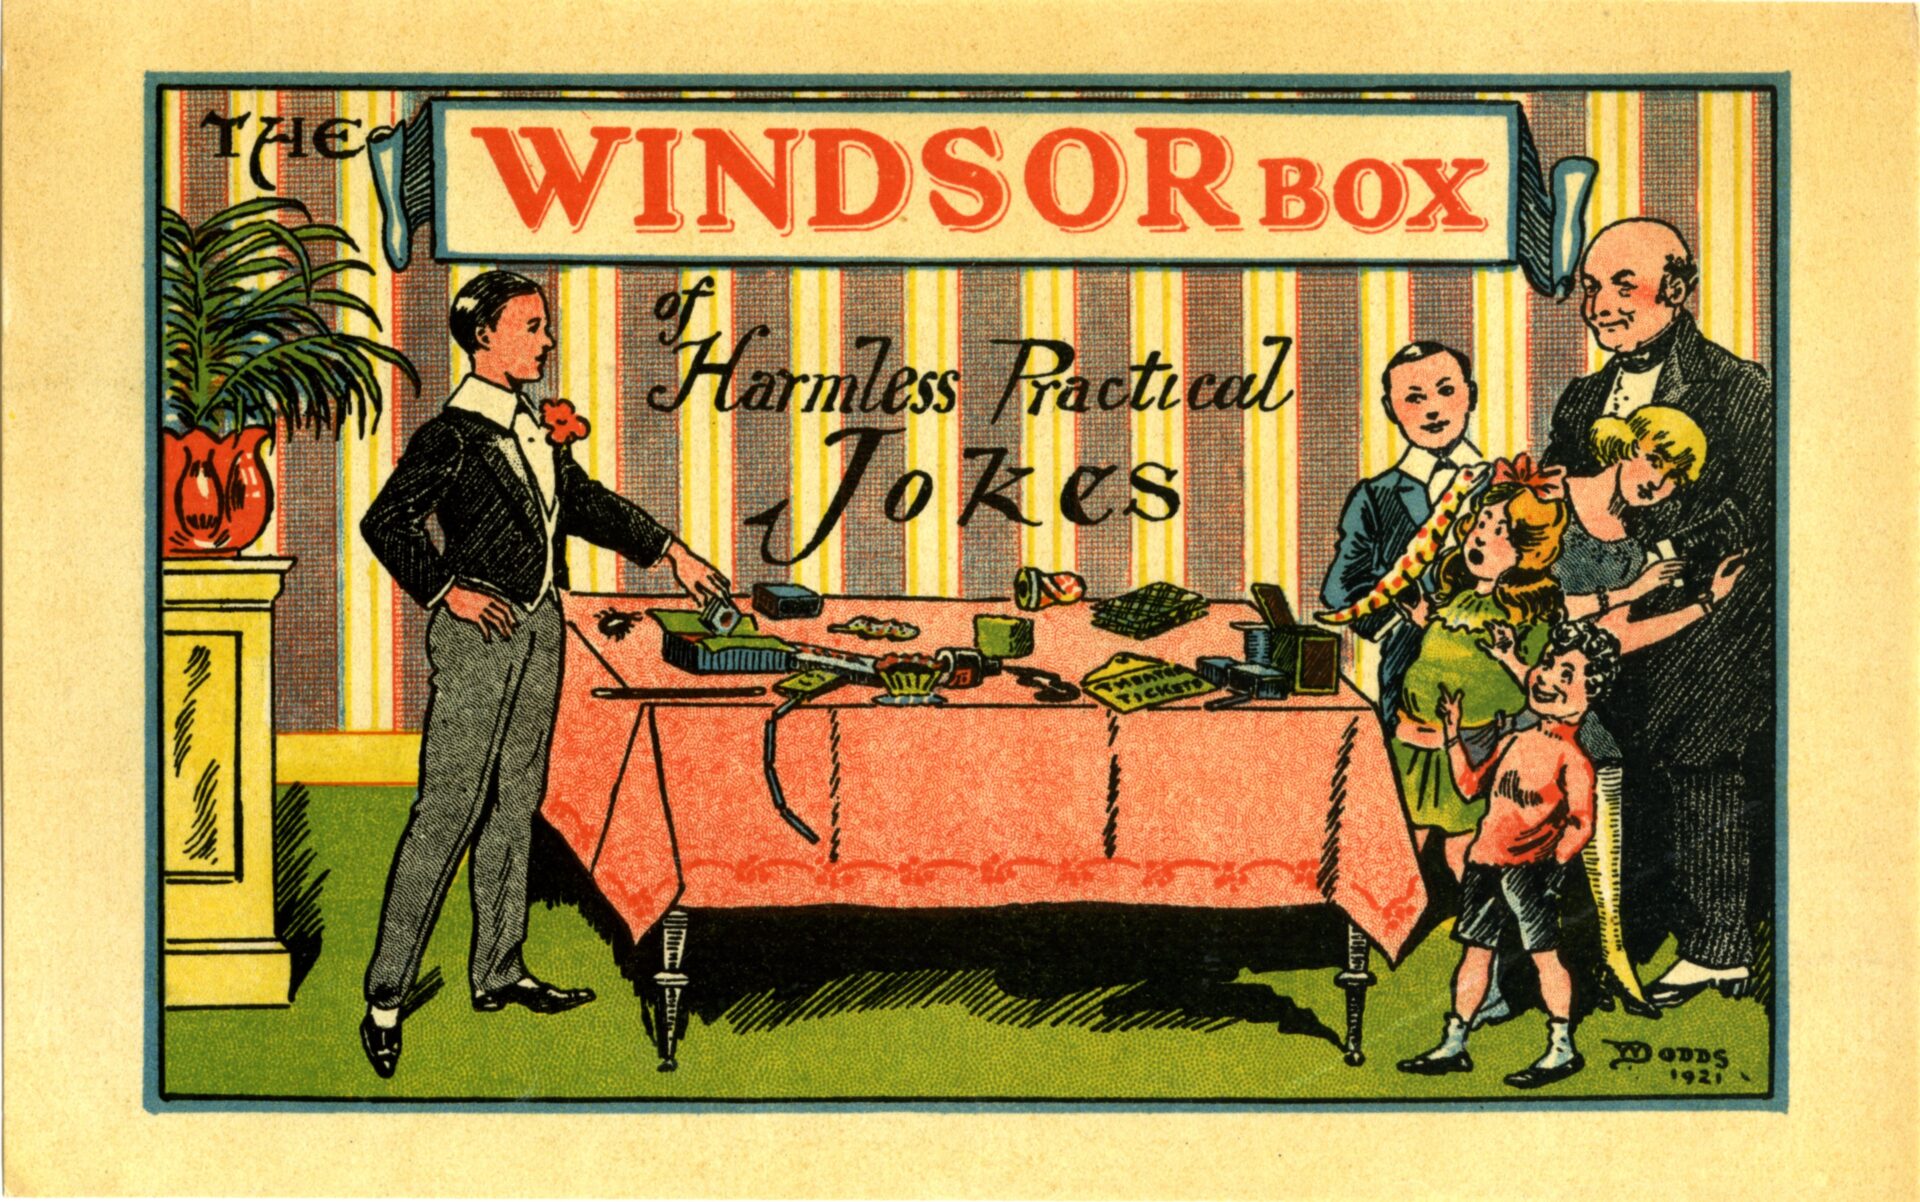 The Windsor Box of Harmless Practical Jokes – label only